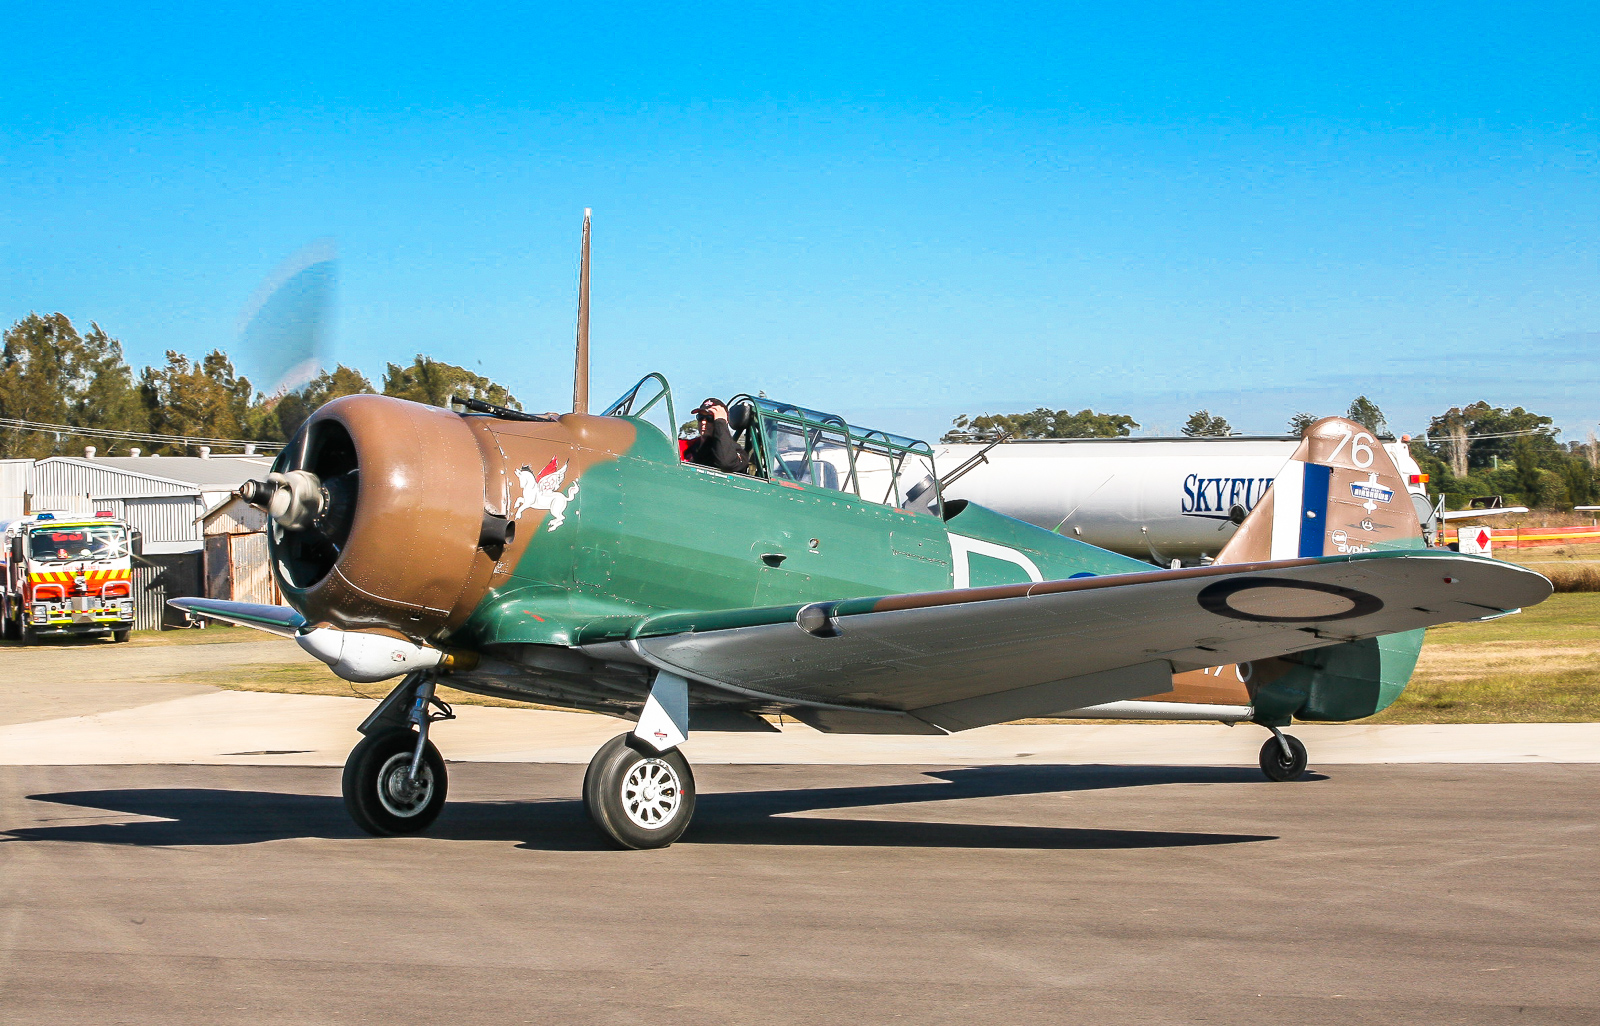 A CAC Wirraway taxiing before the crowd at the Maitland Air Show. (Phil Buckley photo)